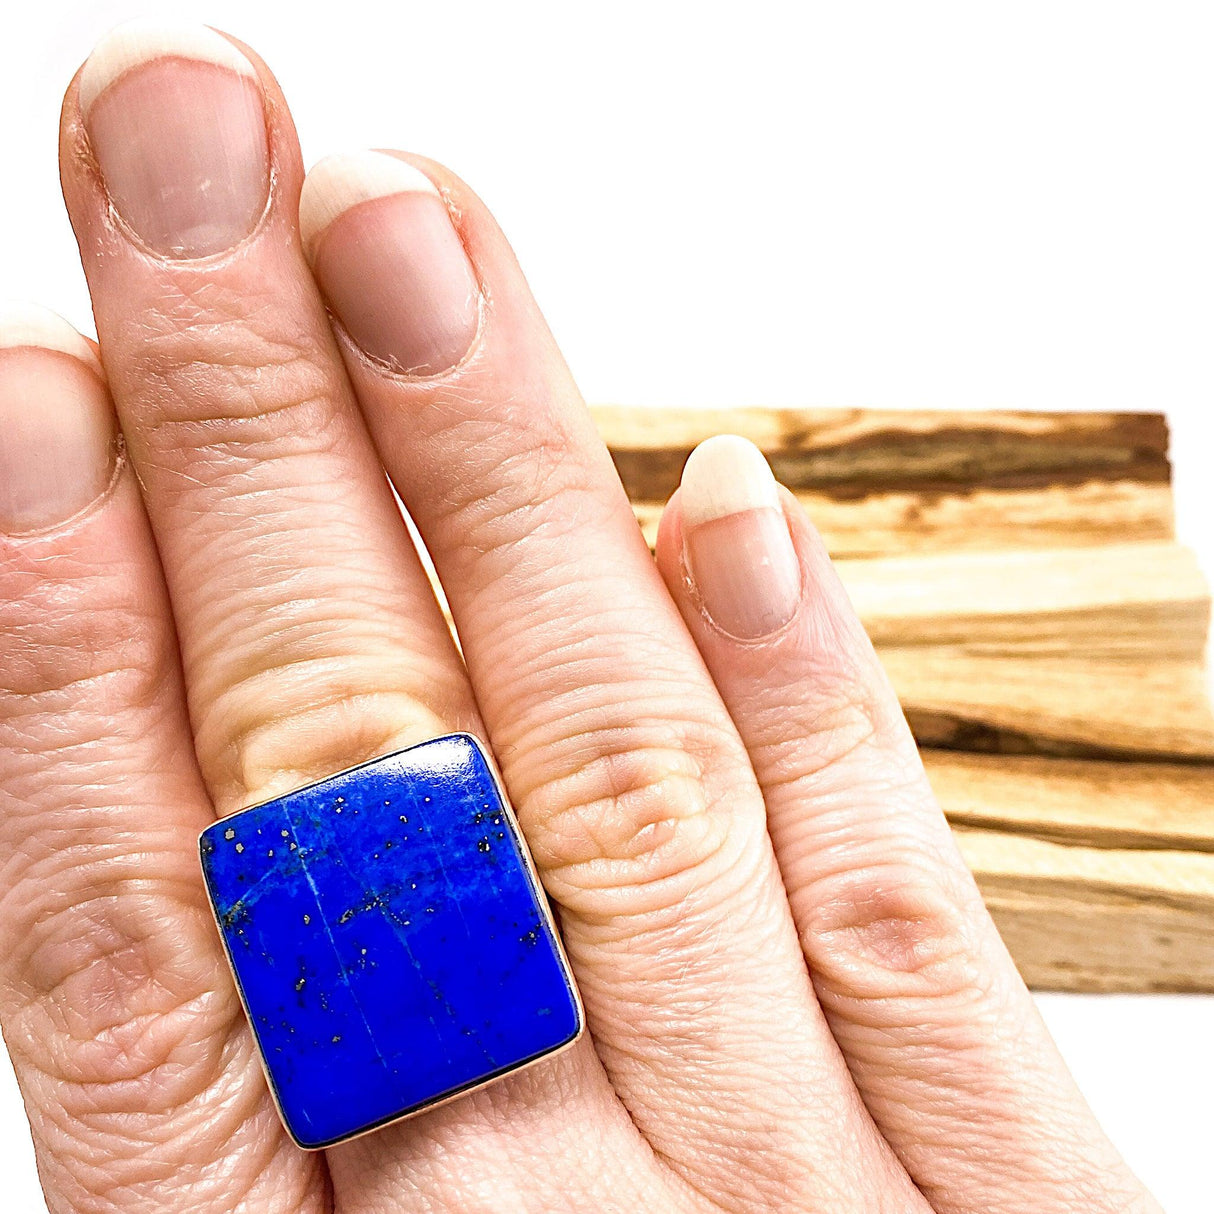 Lapis Lazuli from Chile Square Cabochon Ring with Hammered Band Size 11 KRGJ1432 - Nature's Magick